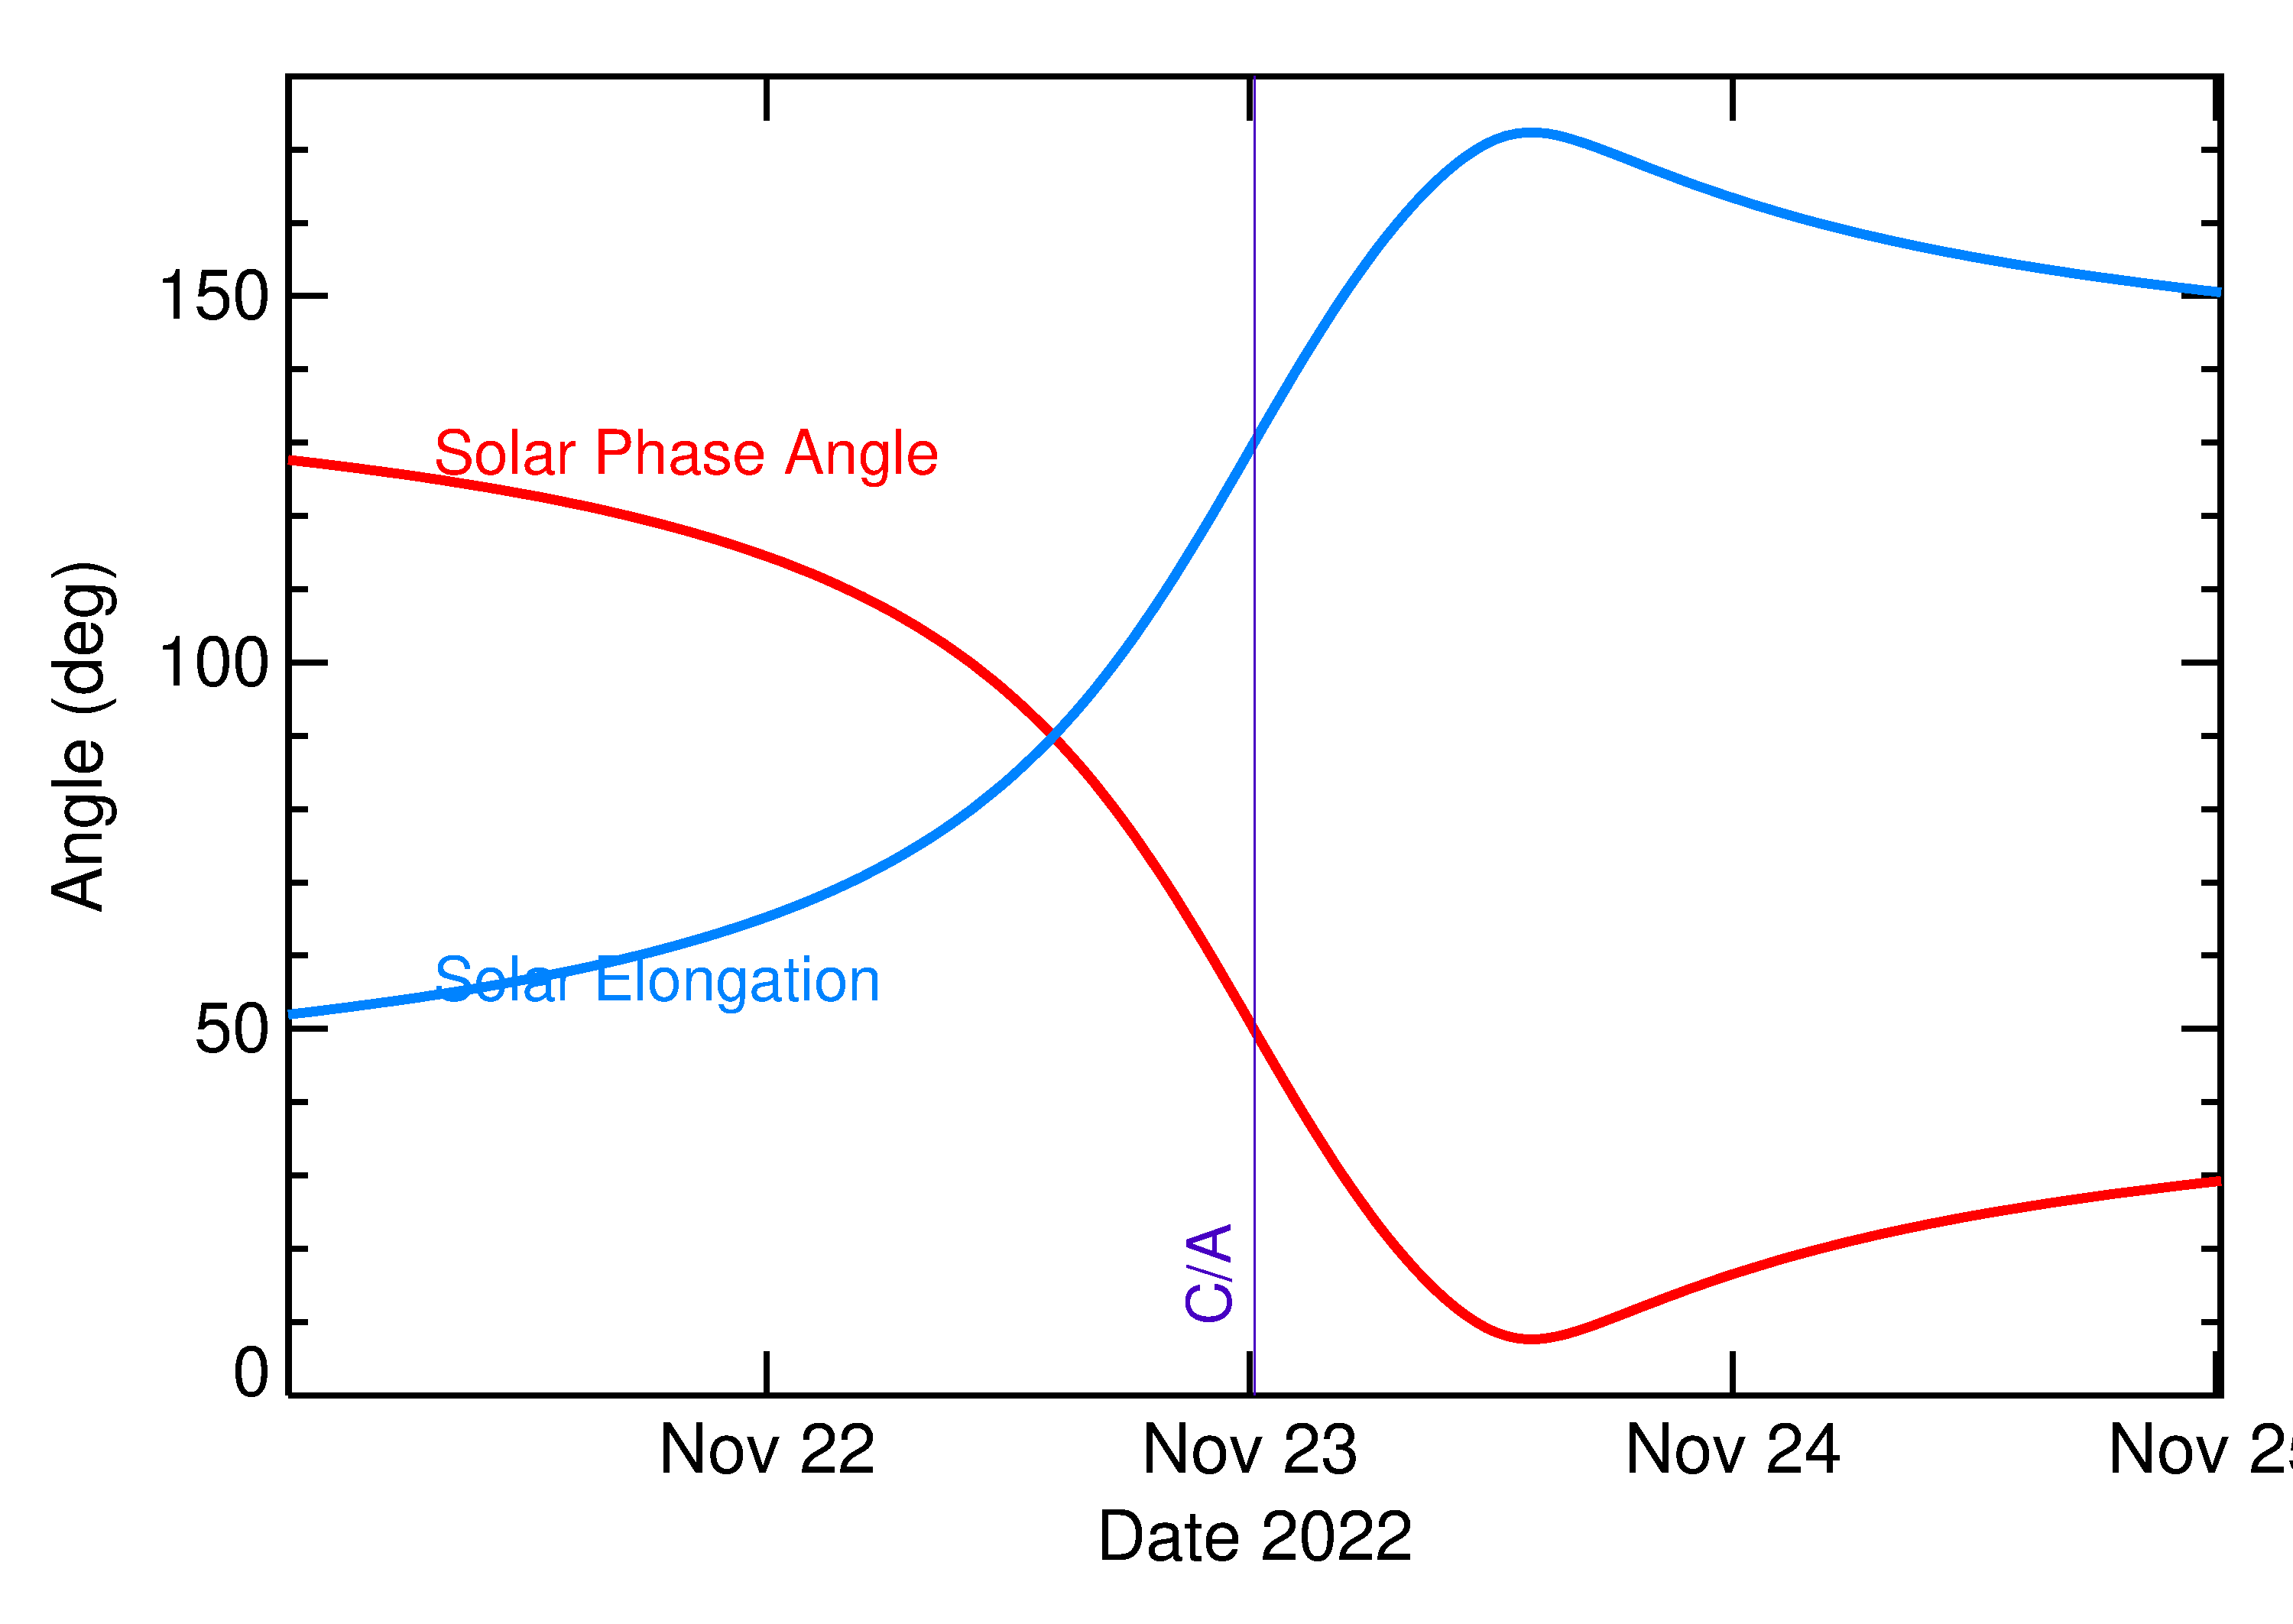 Solar Elongation and Solar Phase Angle of 2022 WO6 in the days around closest approach